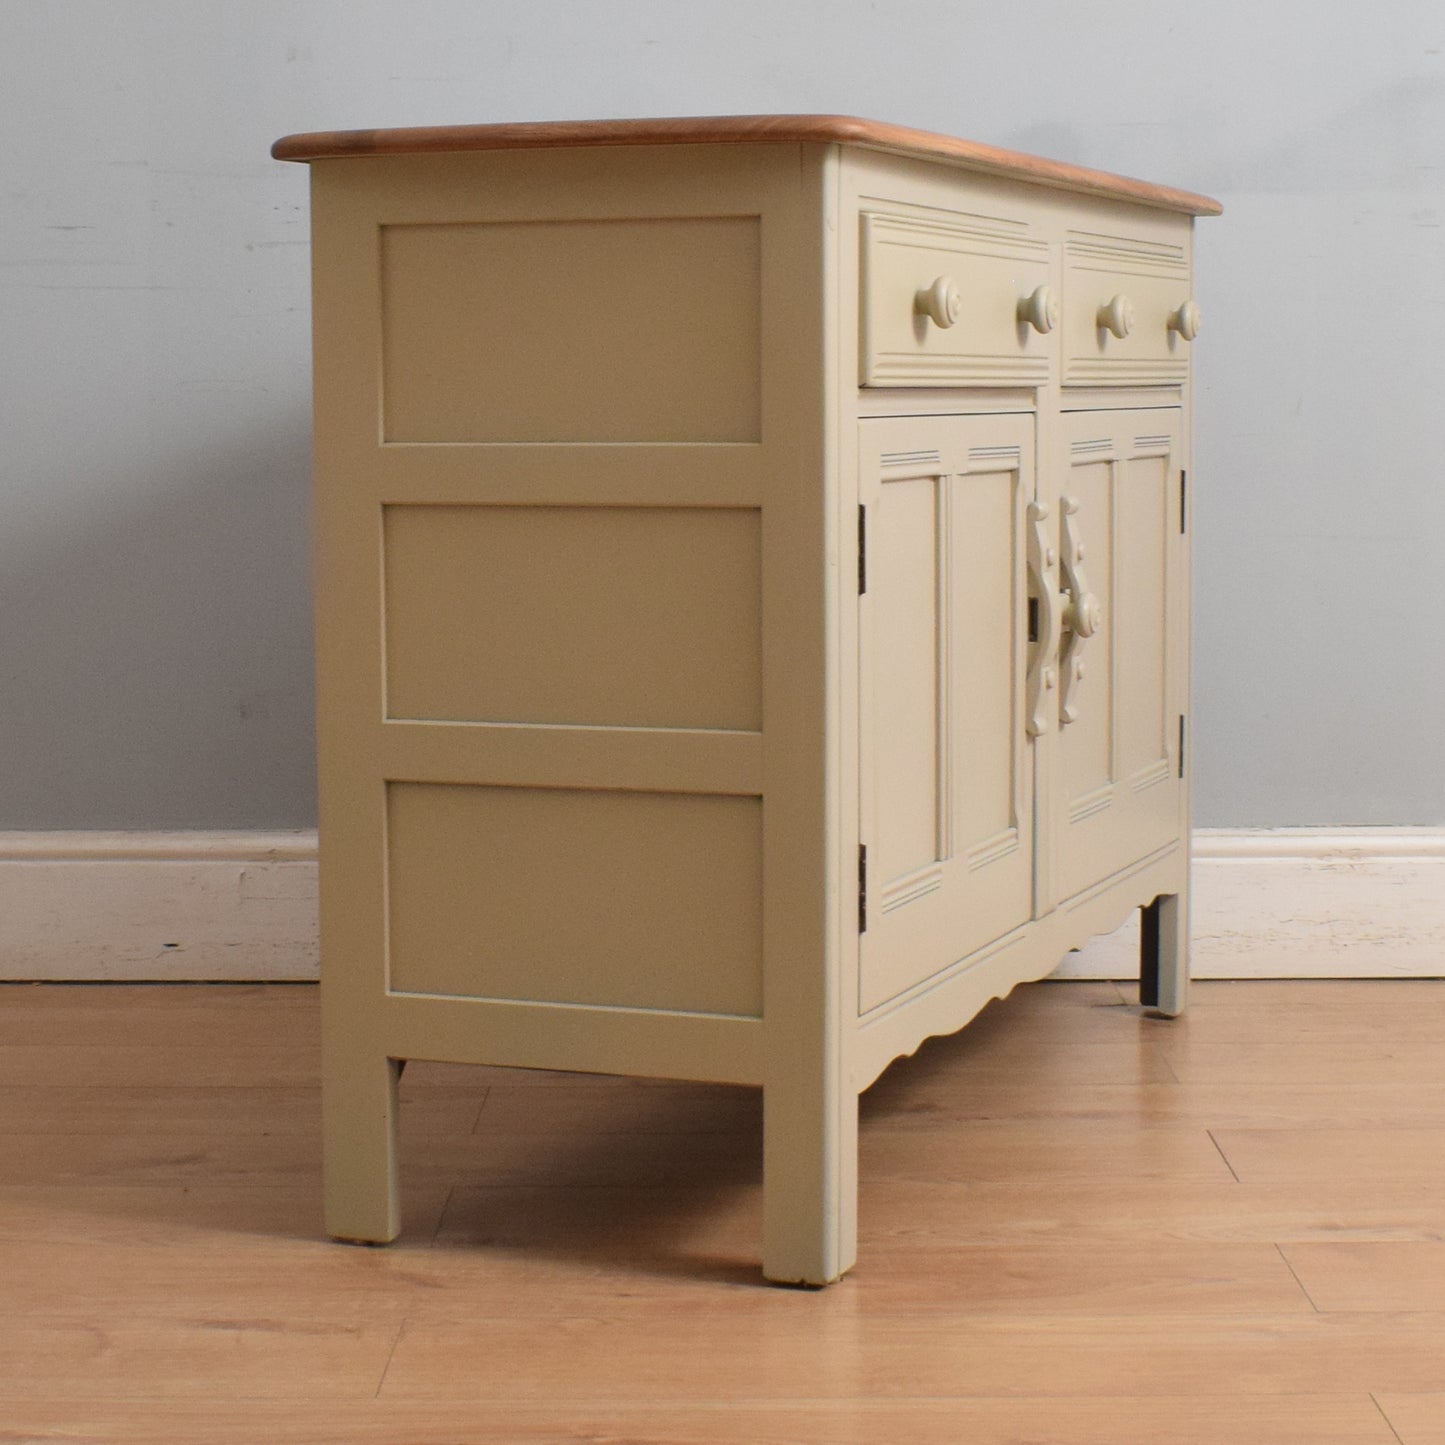 Painted Ercol Sideboard